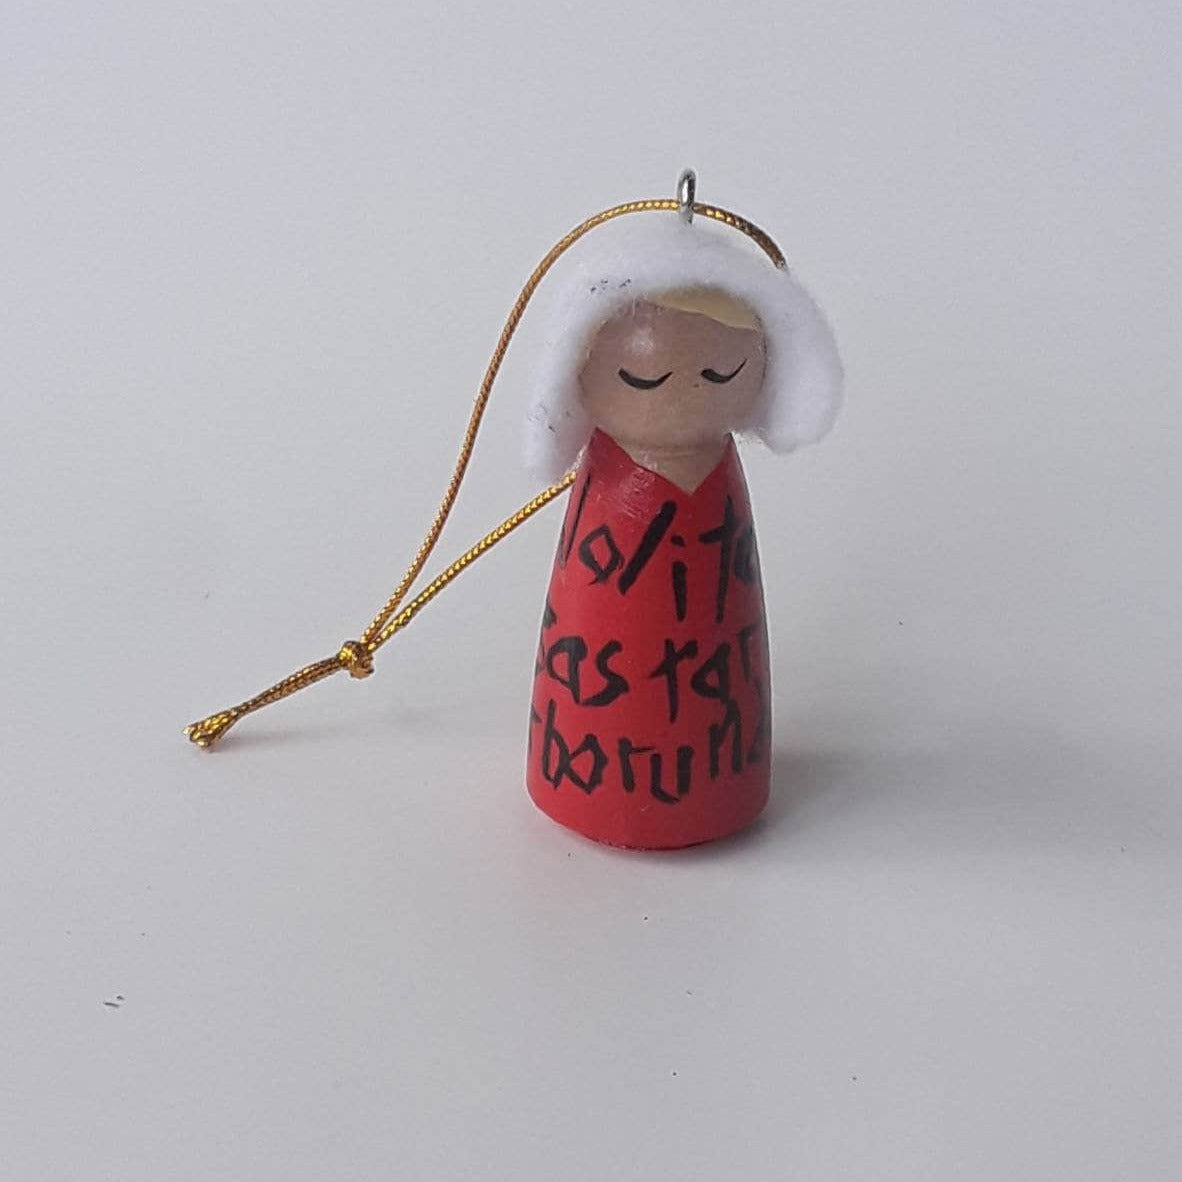 Offred Christmas ornaments, Offred ornament, Offred peg doll, Offred doll, Offred, Handmaids tale doll, Handmaids tale ornament